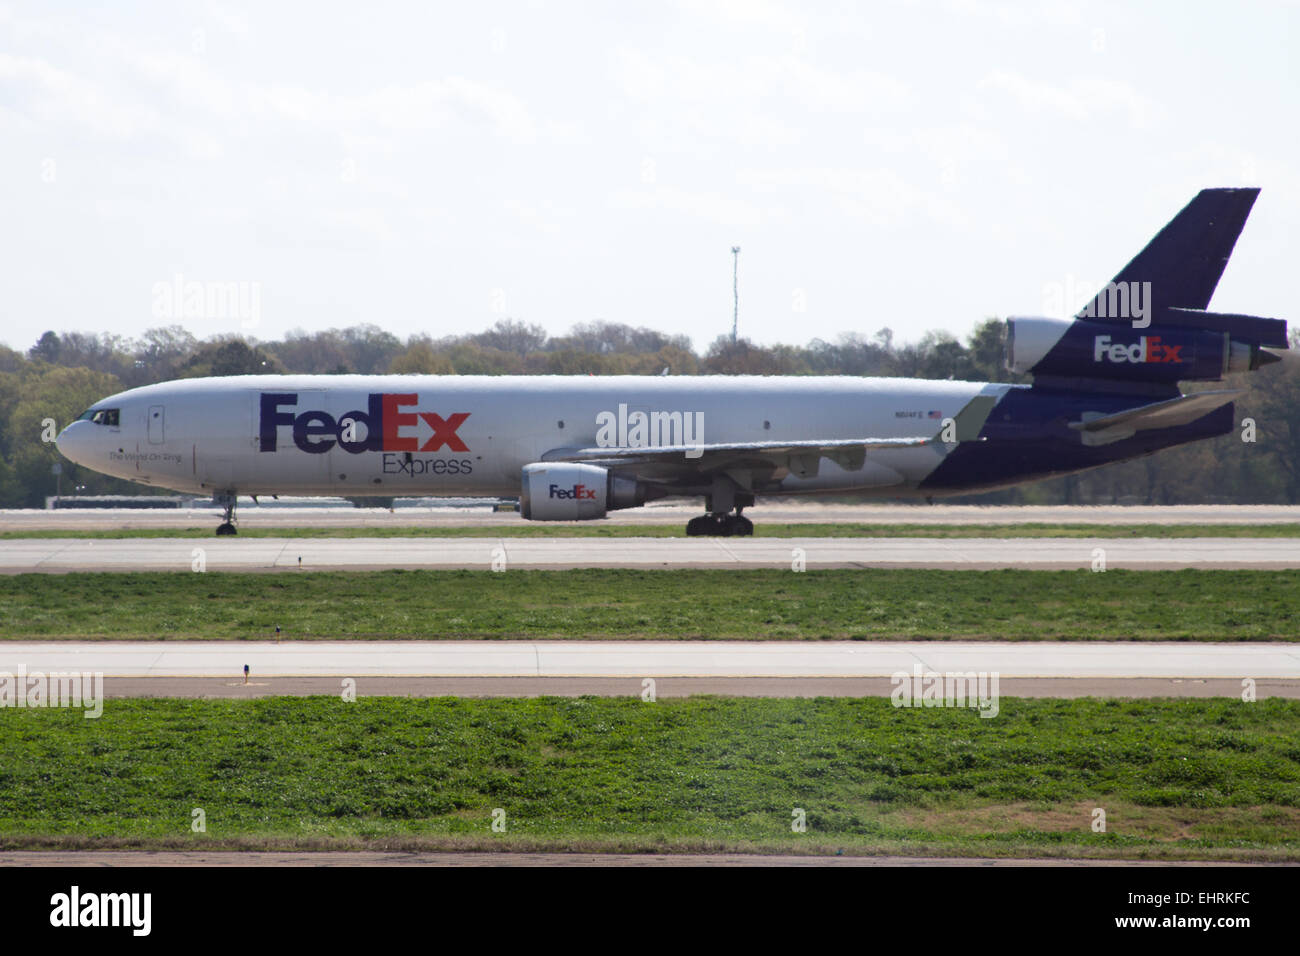 A FedEx express plane on the runway at Memphis International Airport, Tennessee USA Stock Photo